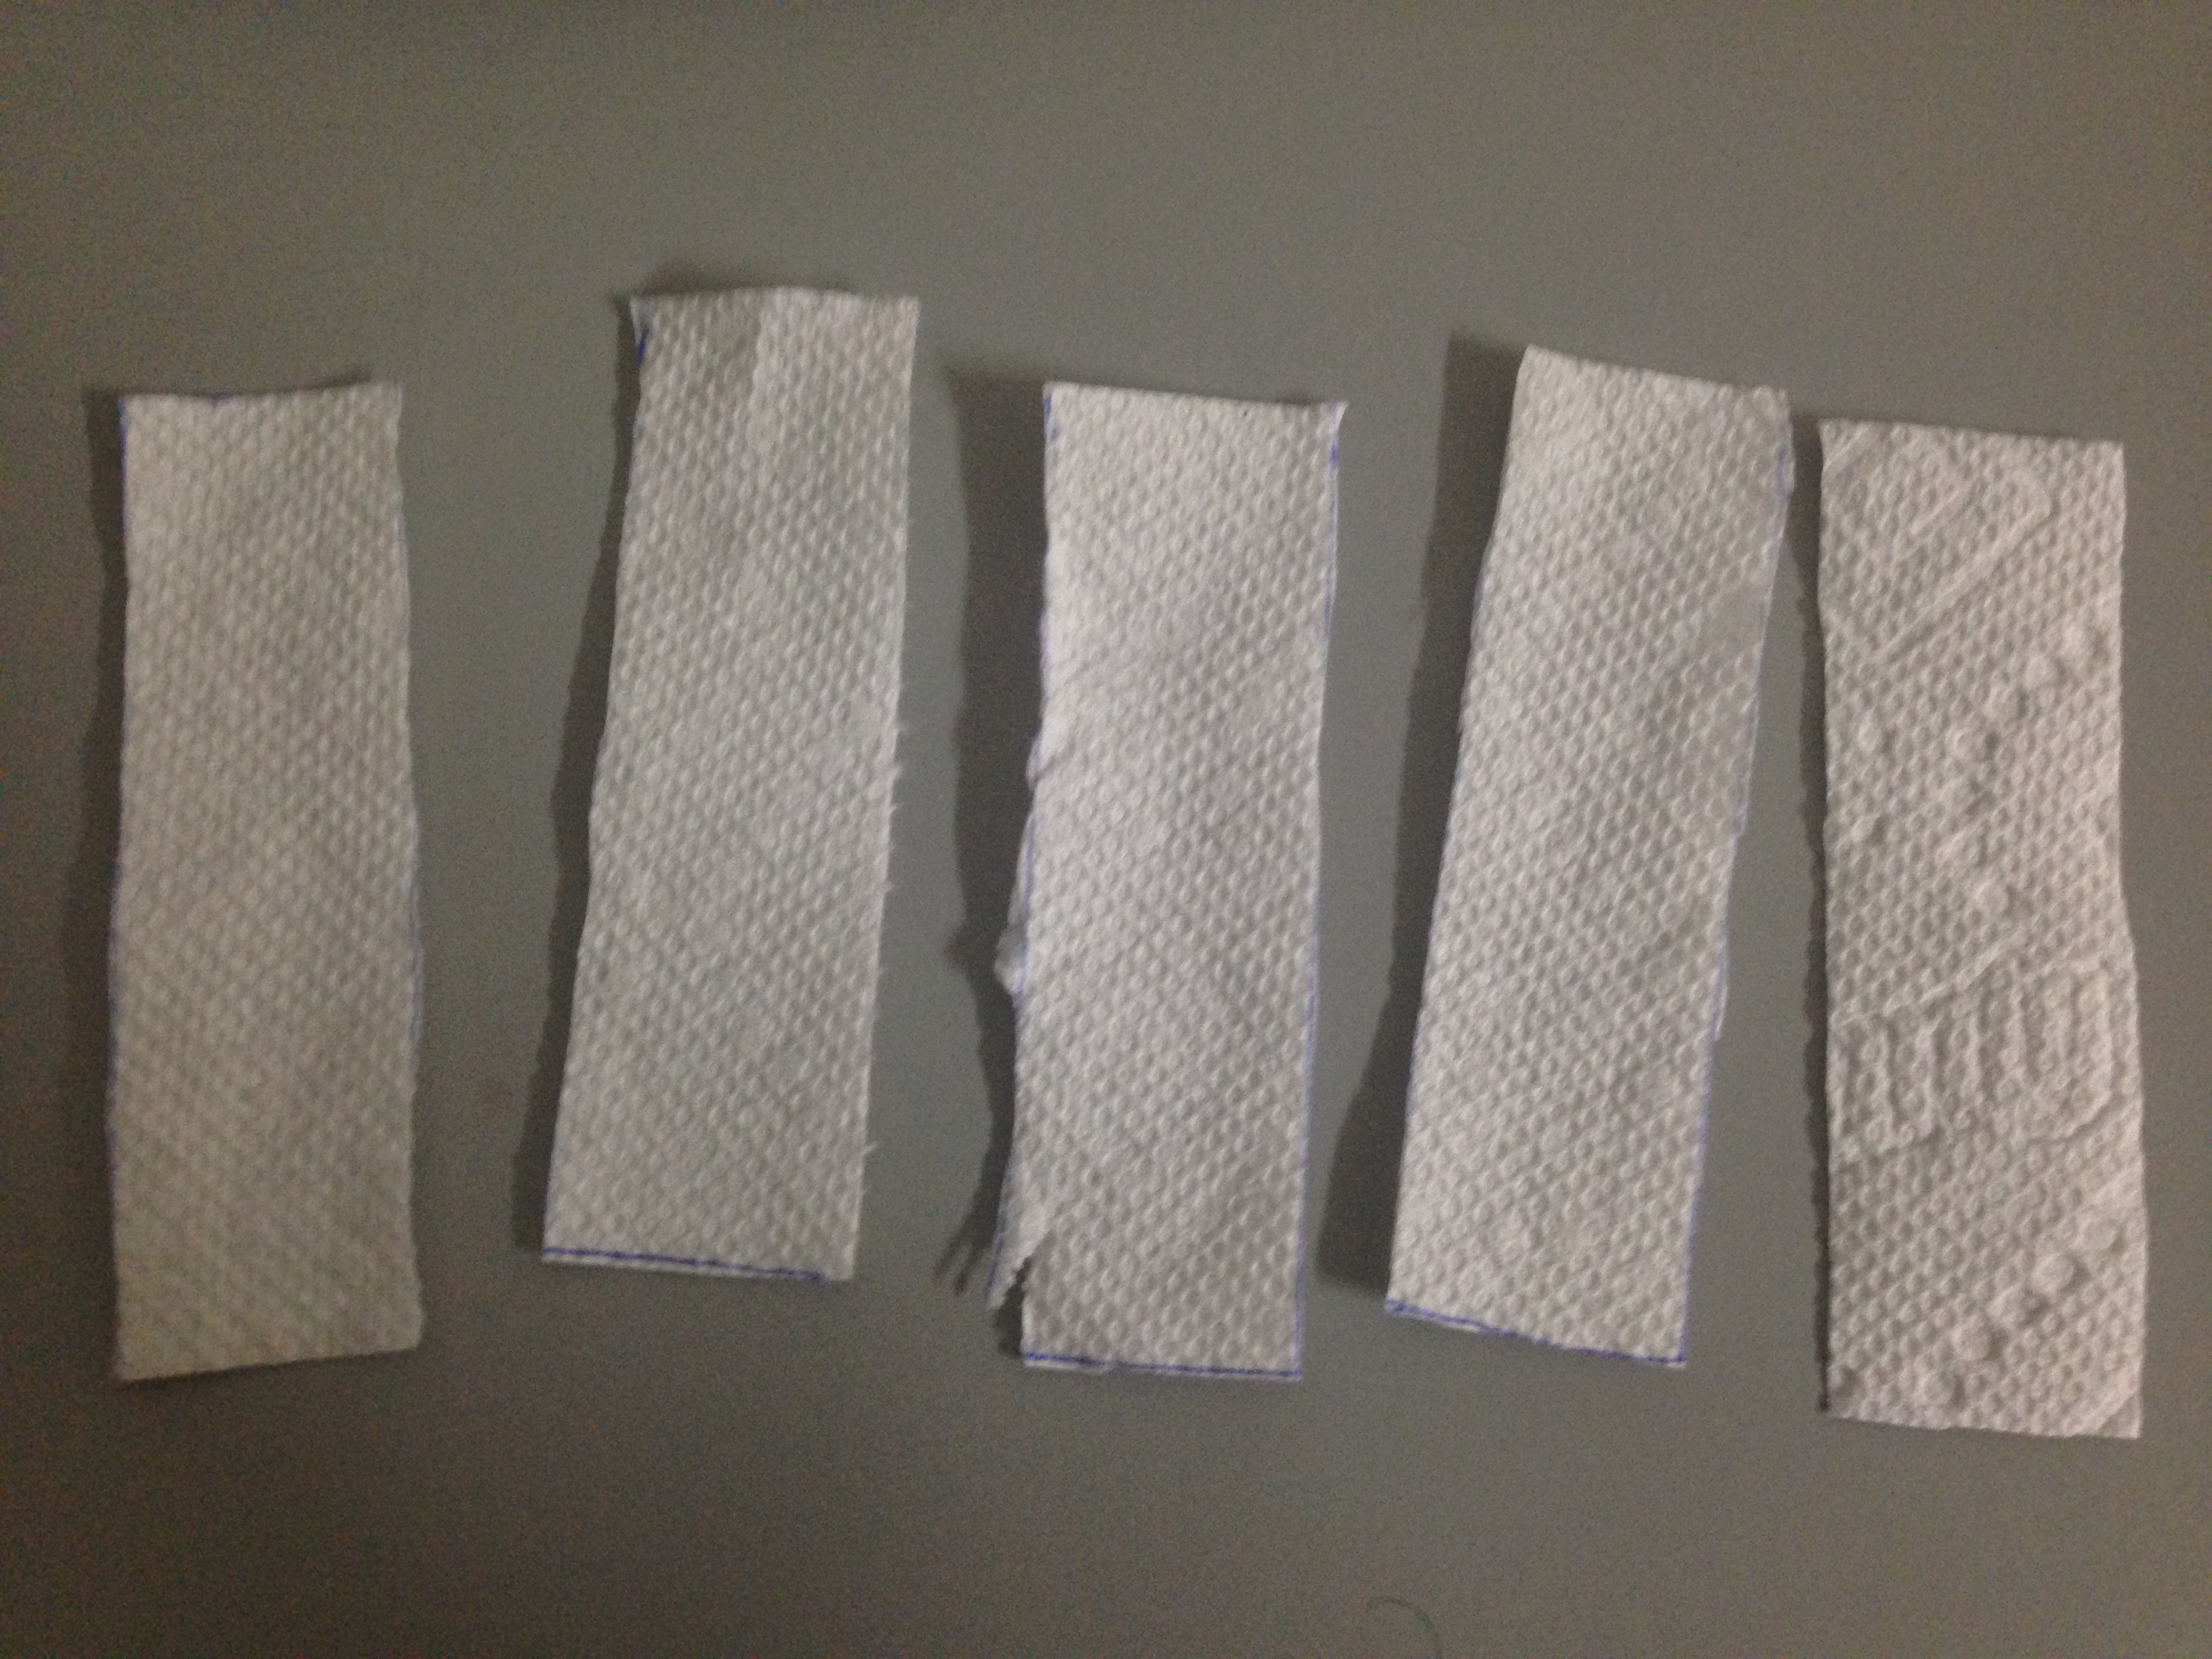 https://upload.wikimedia.org/wikipedia/commons/d/d8/5_pieces_of_paper_towel.JPG